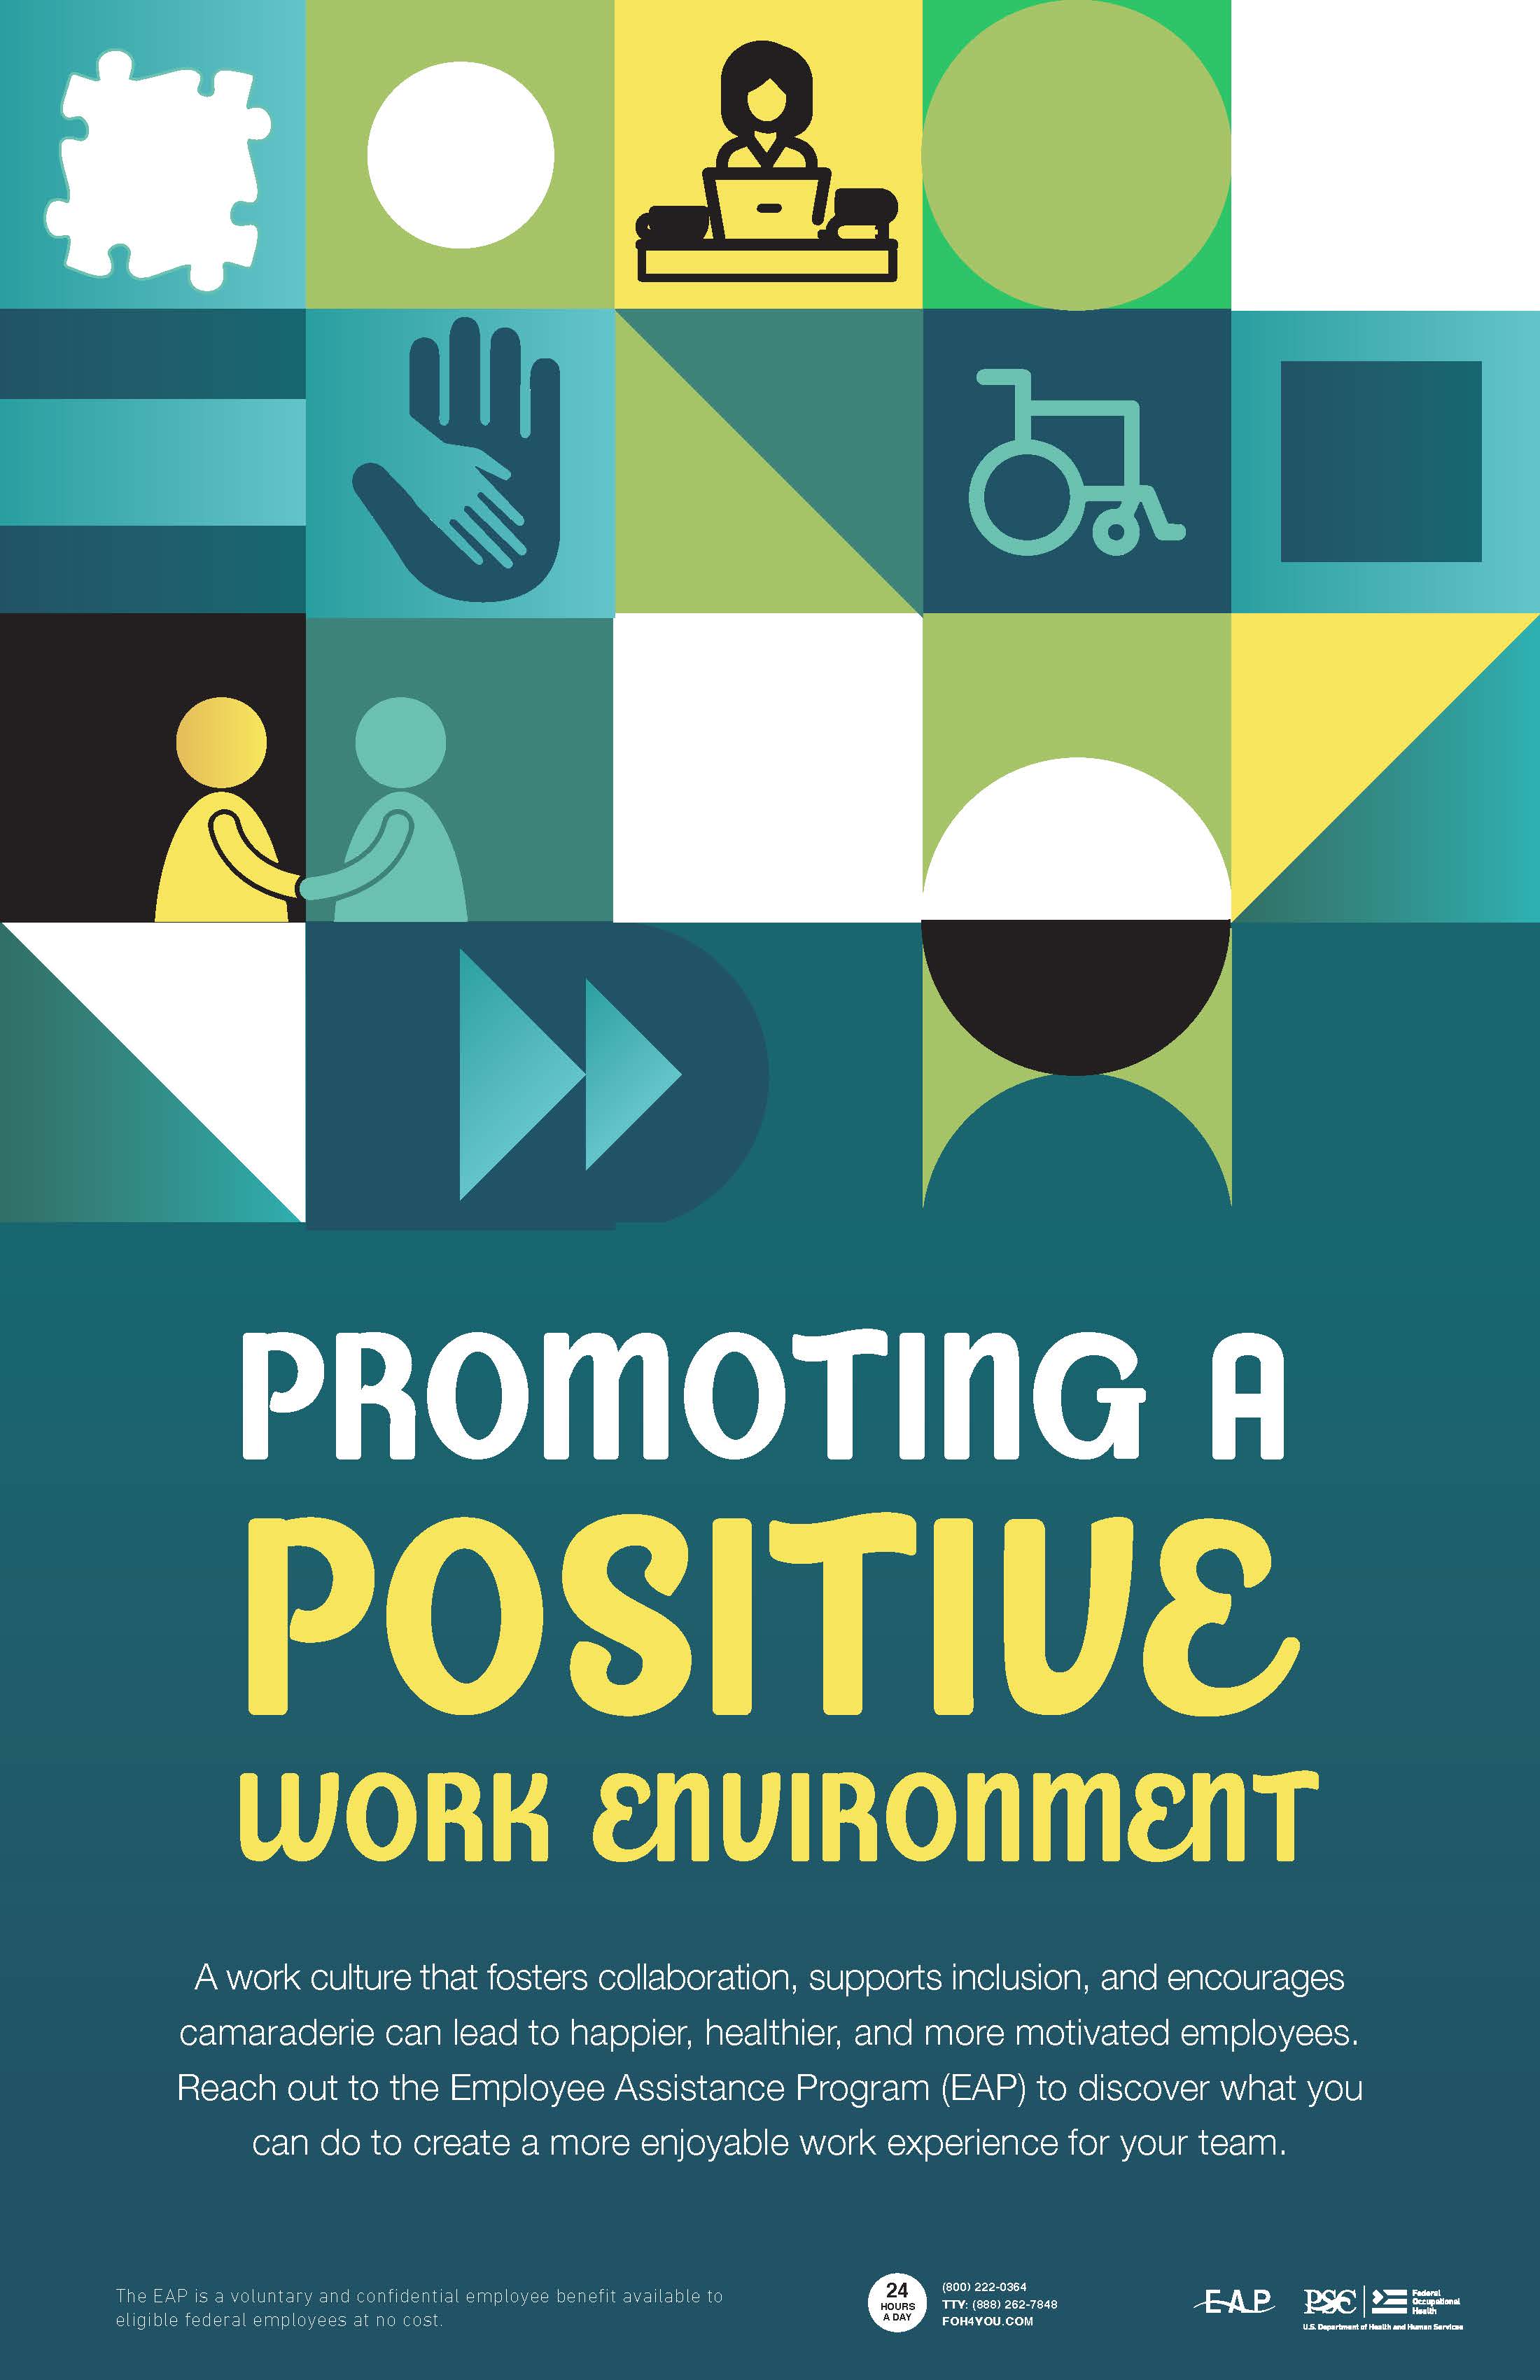 Promoting a Positive Work Environment